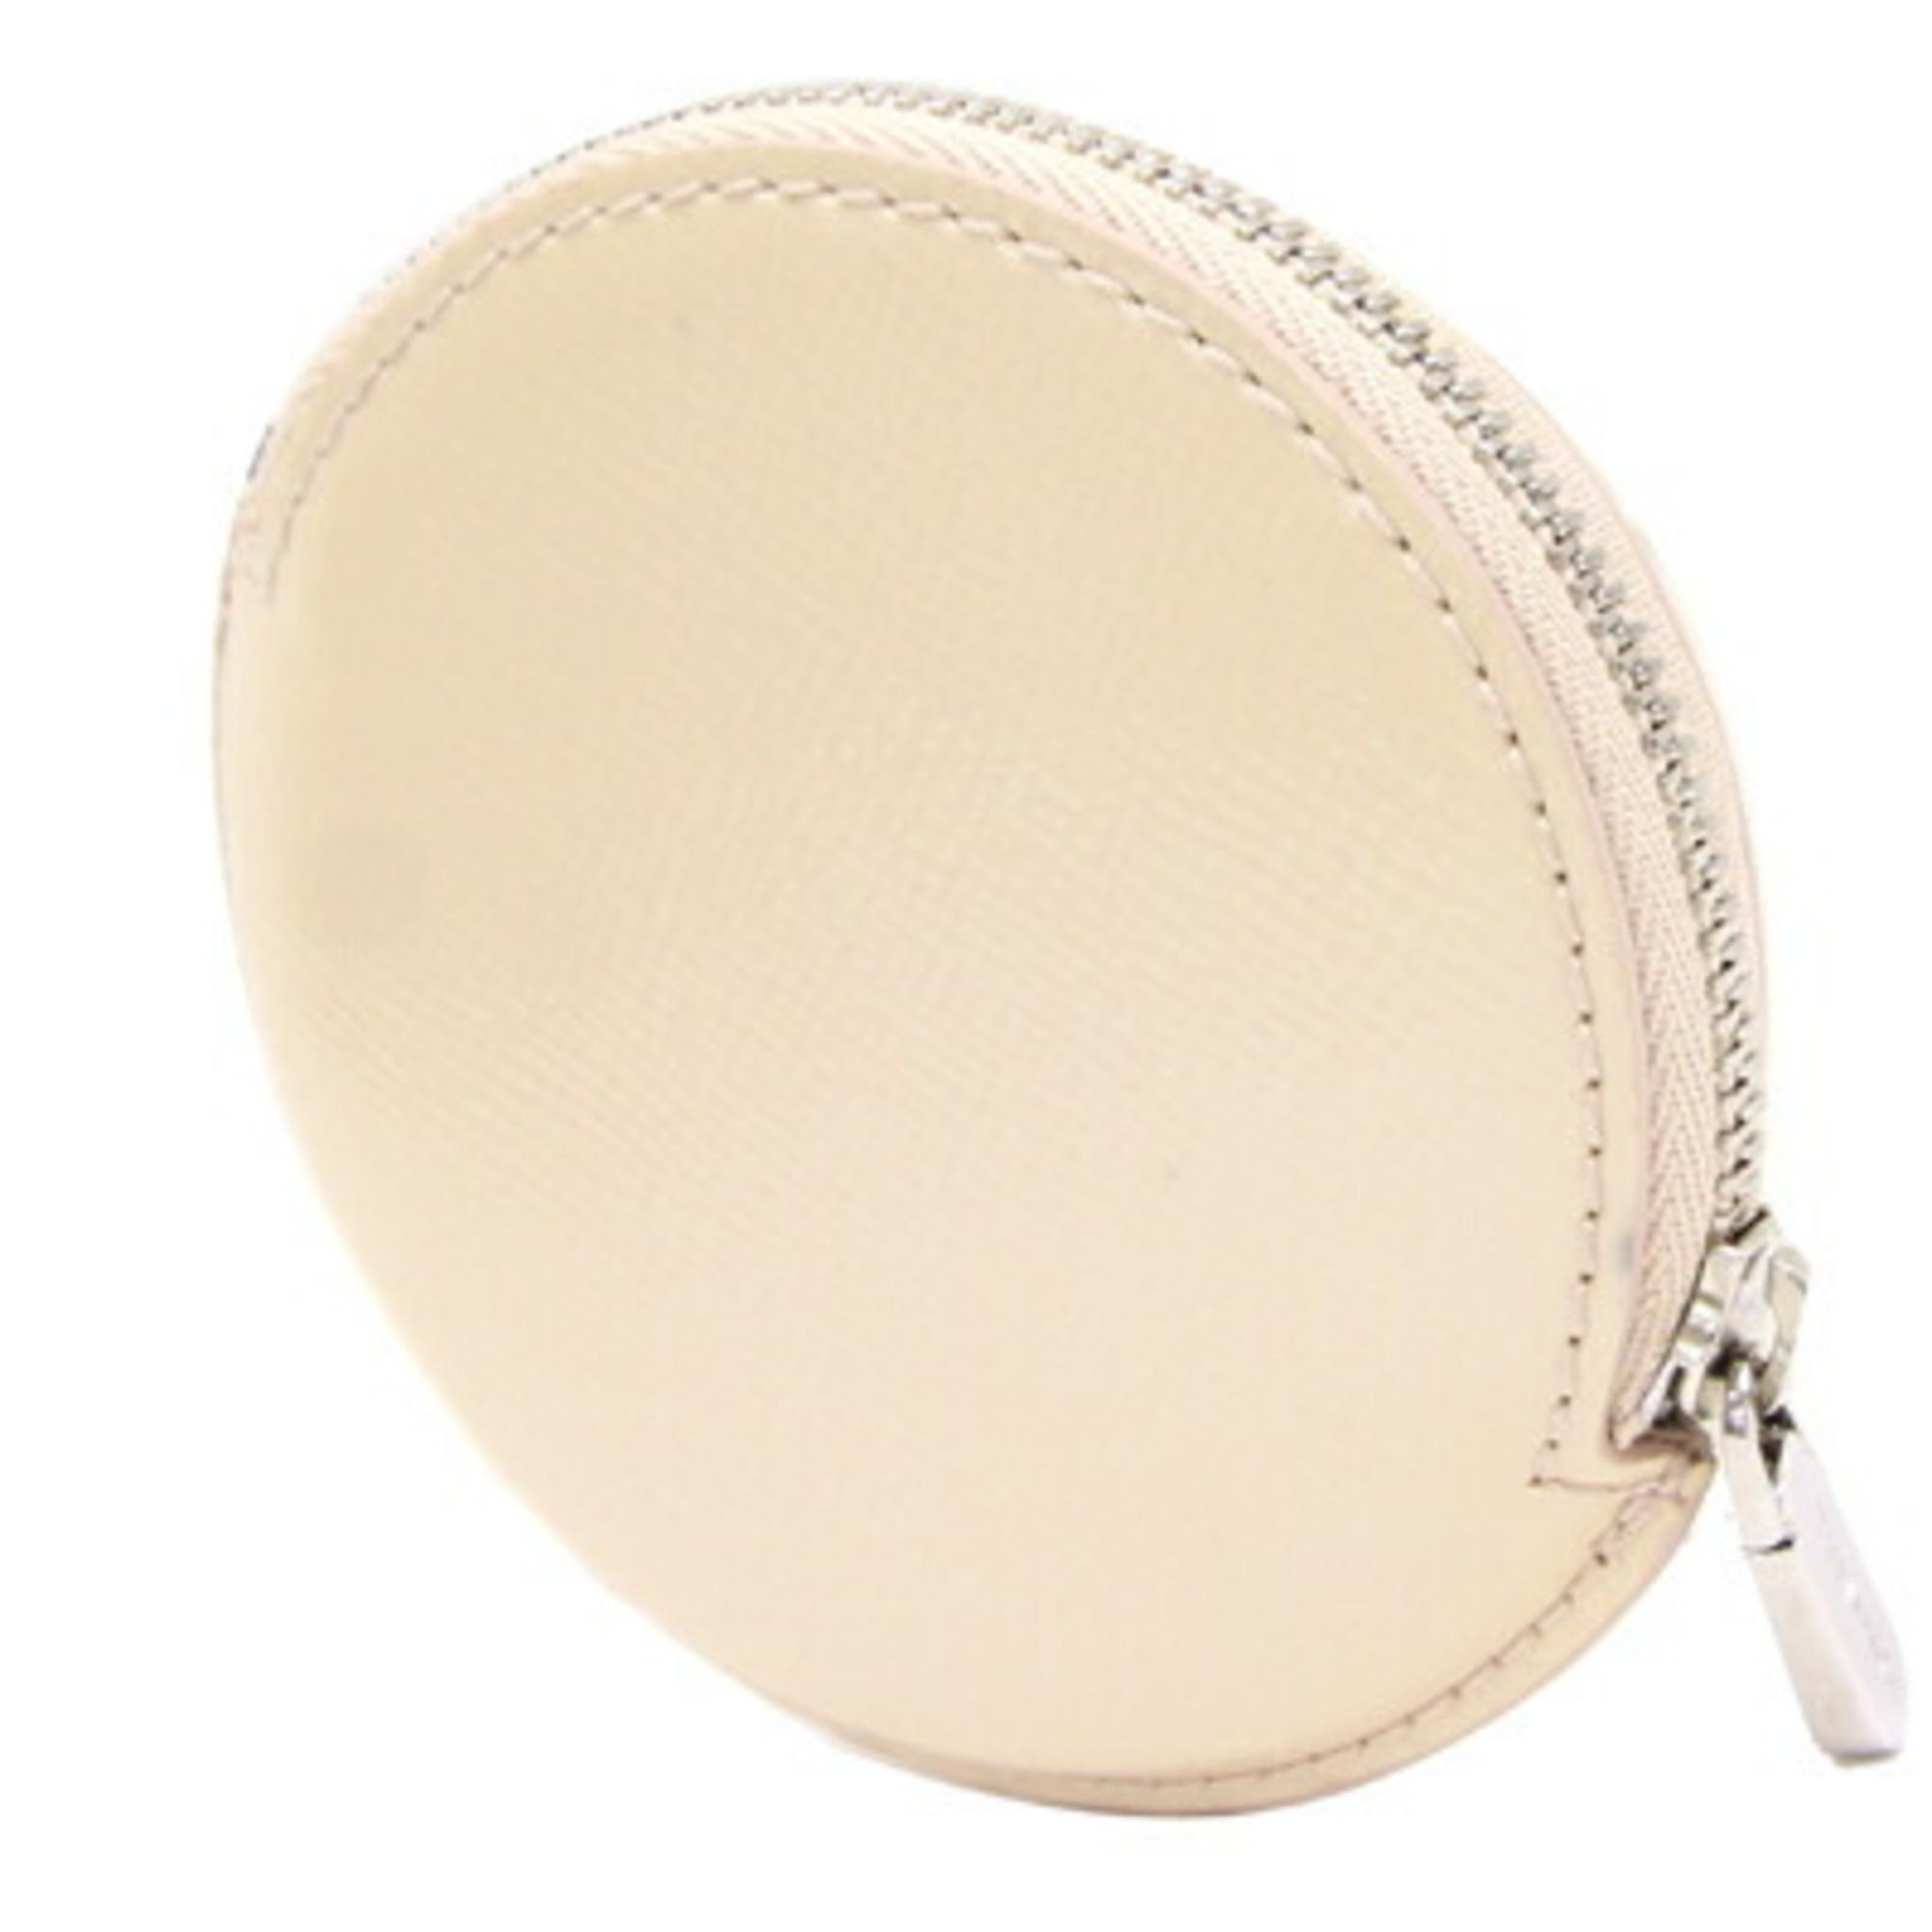 Tiffany Coin Case Ivory Leather Purse Pouch Round Women's TIFFANY&Co.